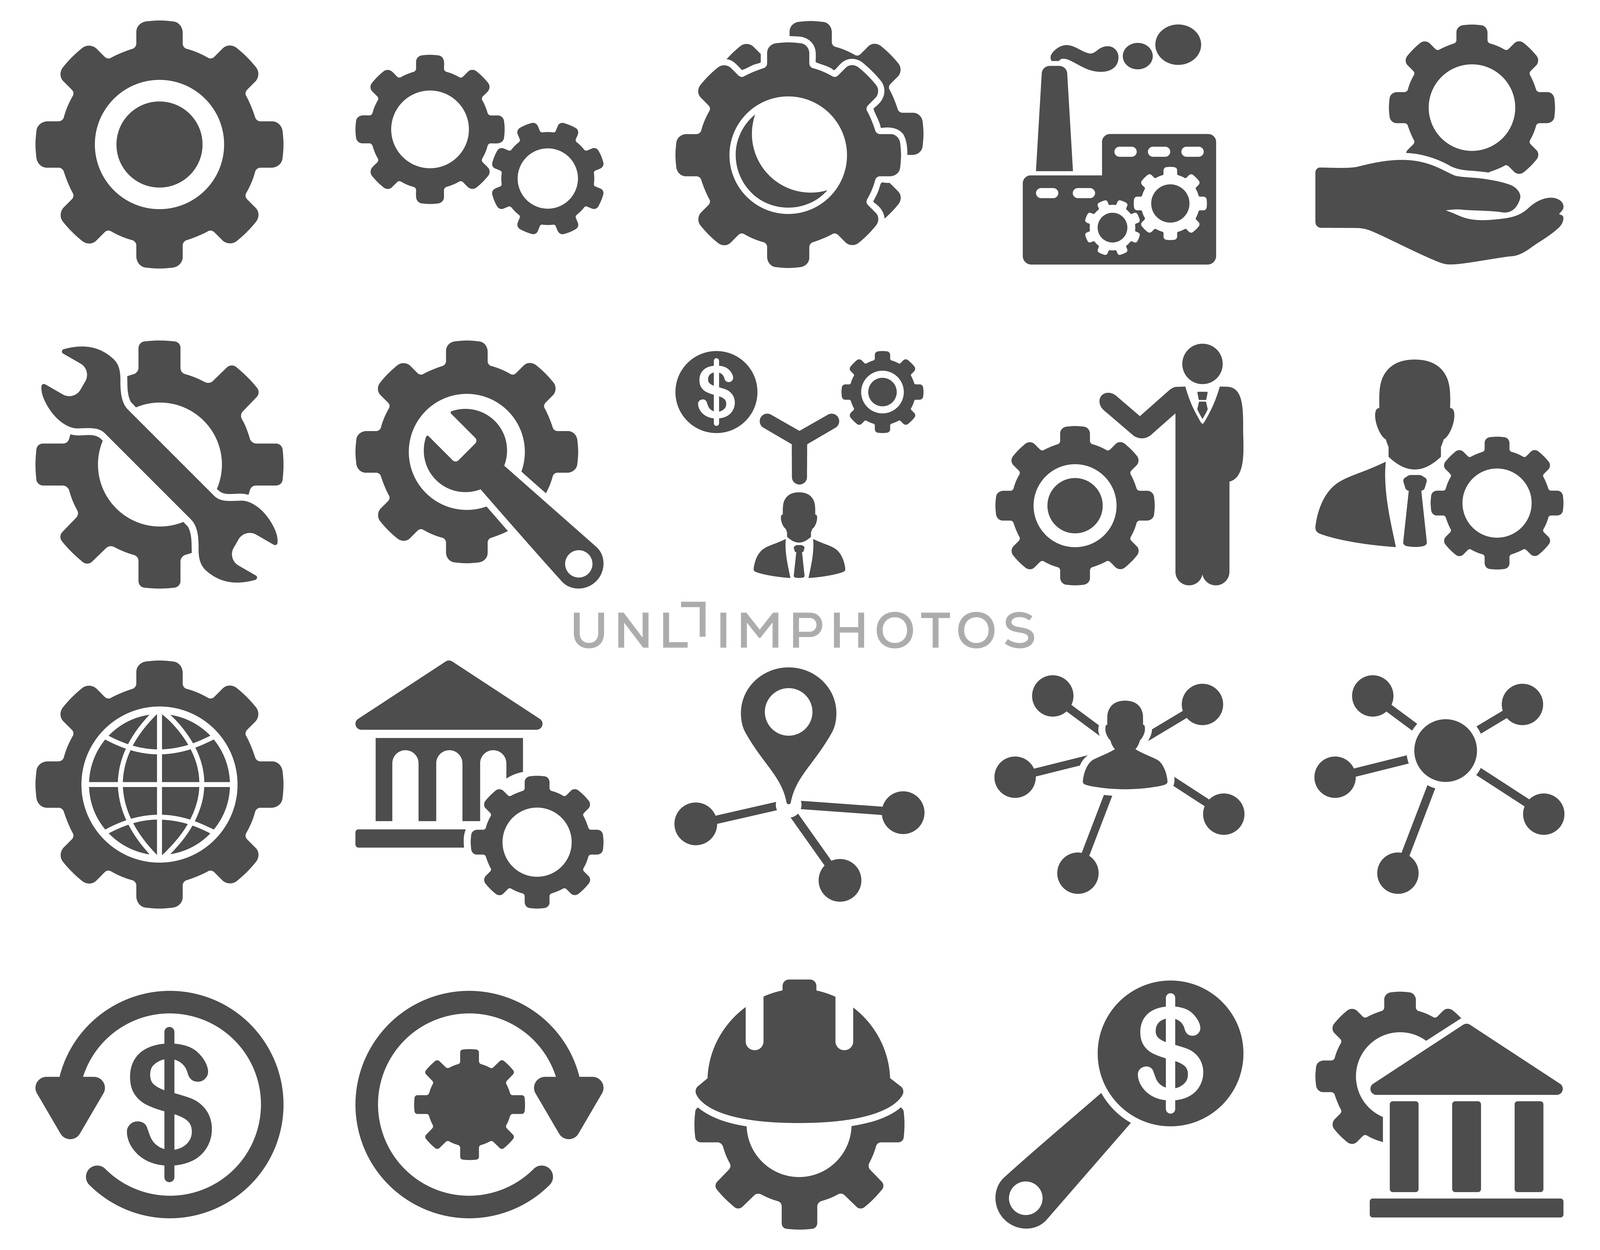 Settings and Tools Icons. Glyph set style is flat images, gray color, isolated on a white background.